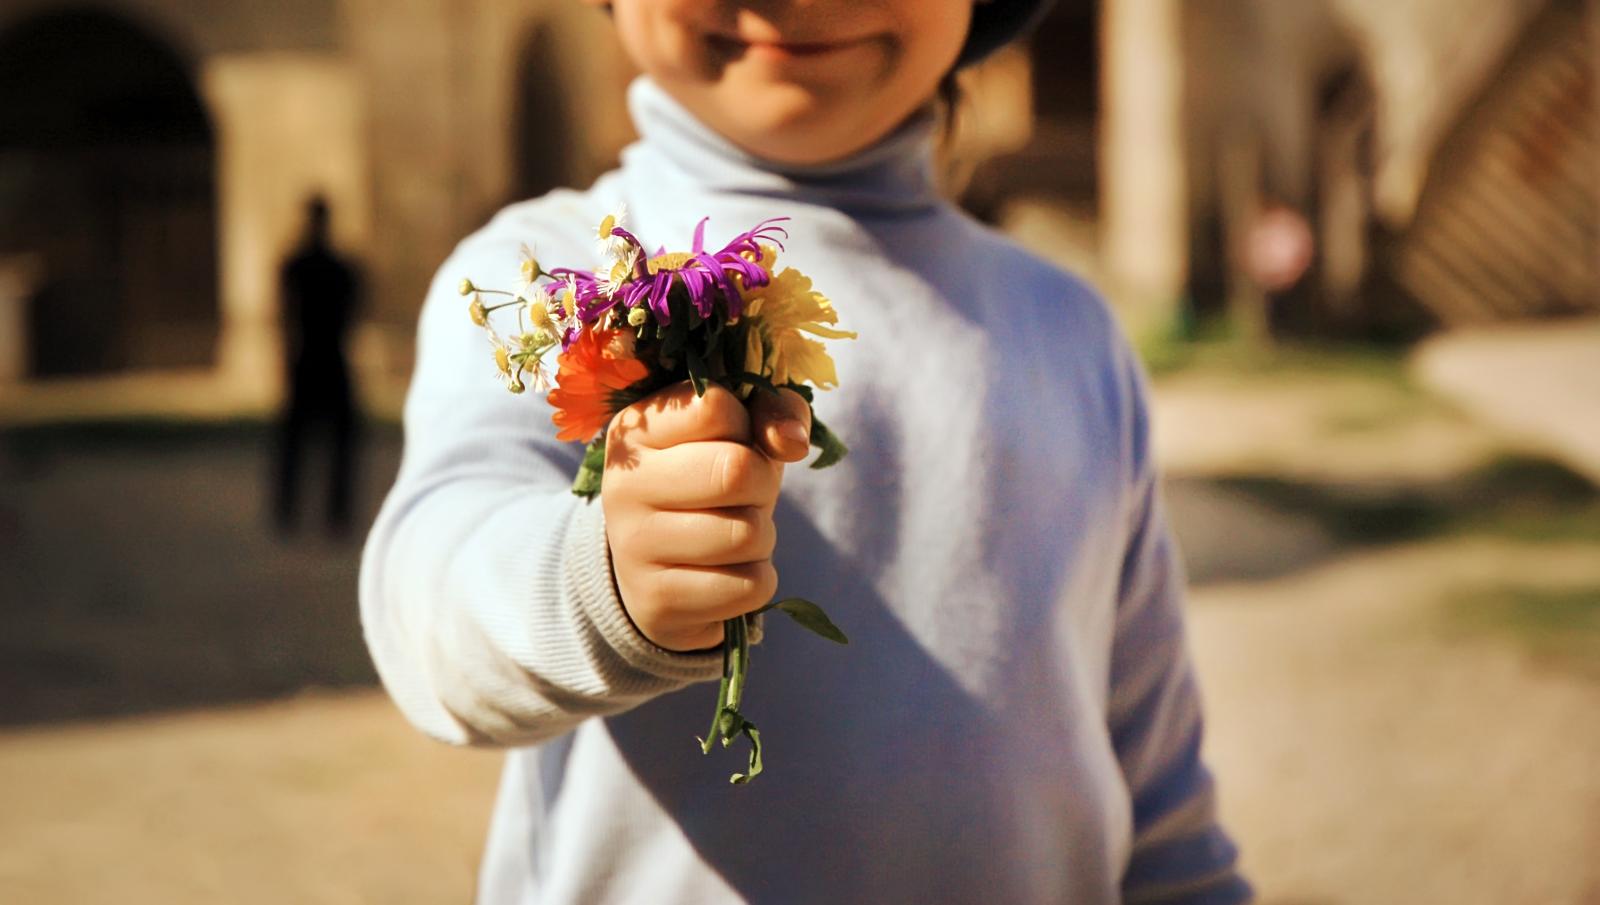 Climate Health Matters Allergies Child Holding Flowers